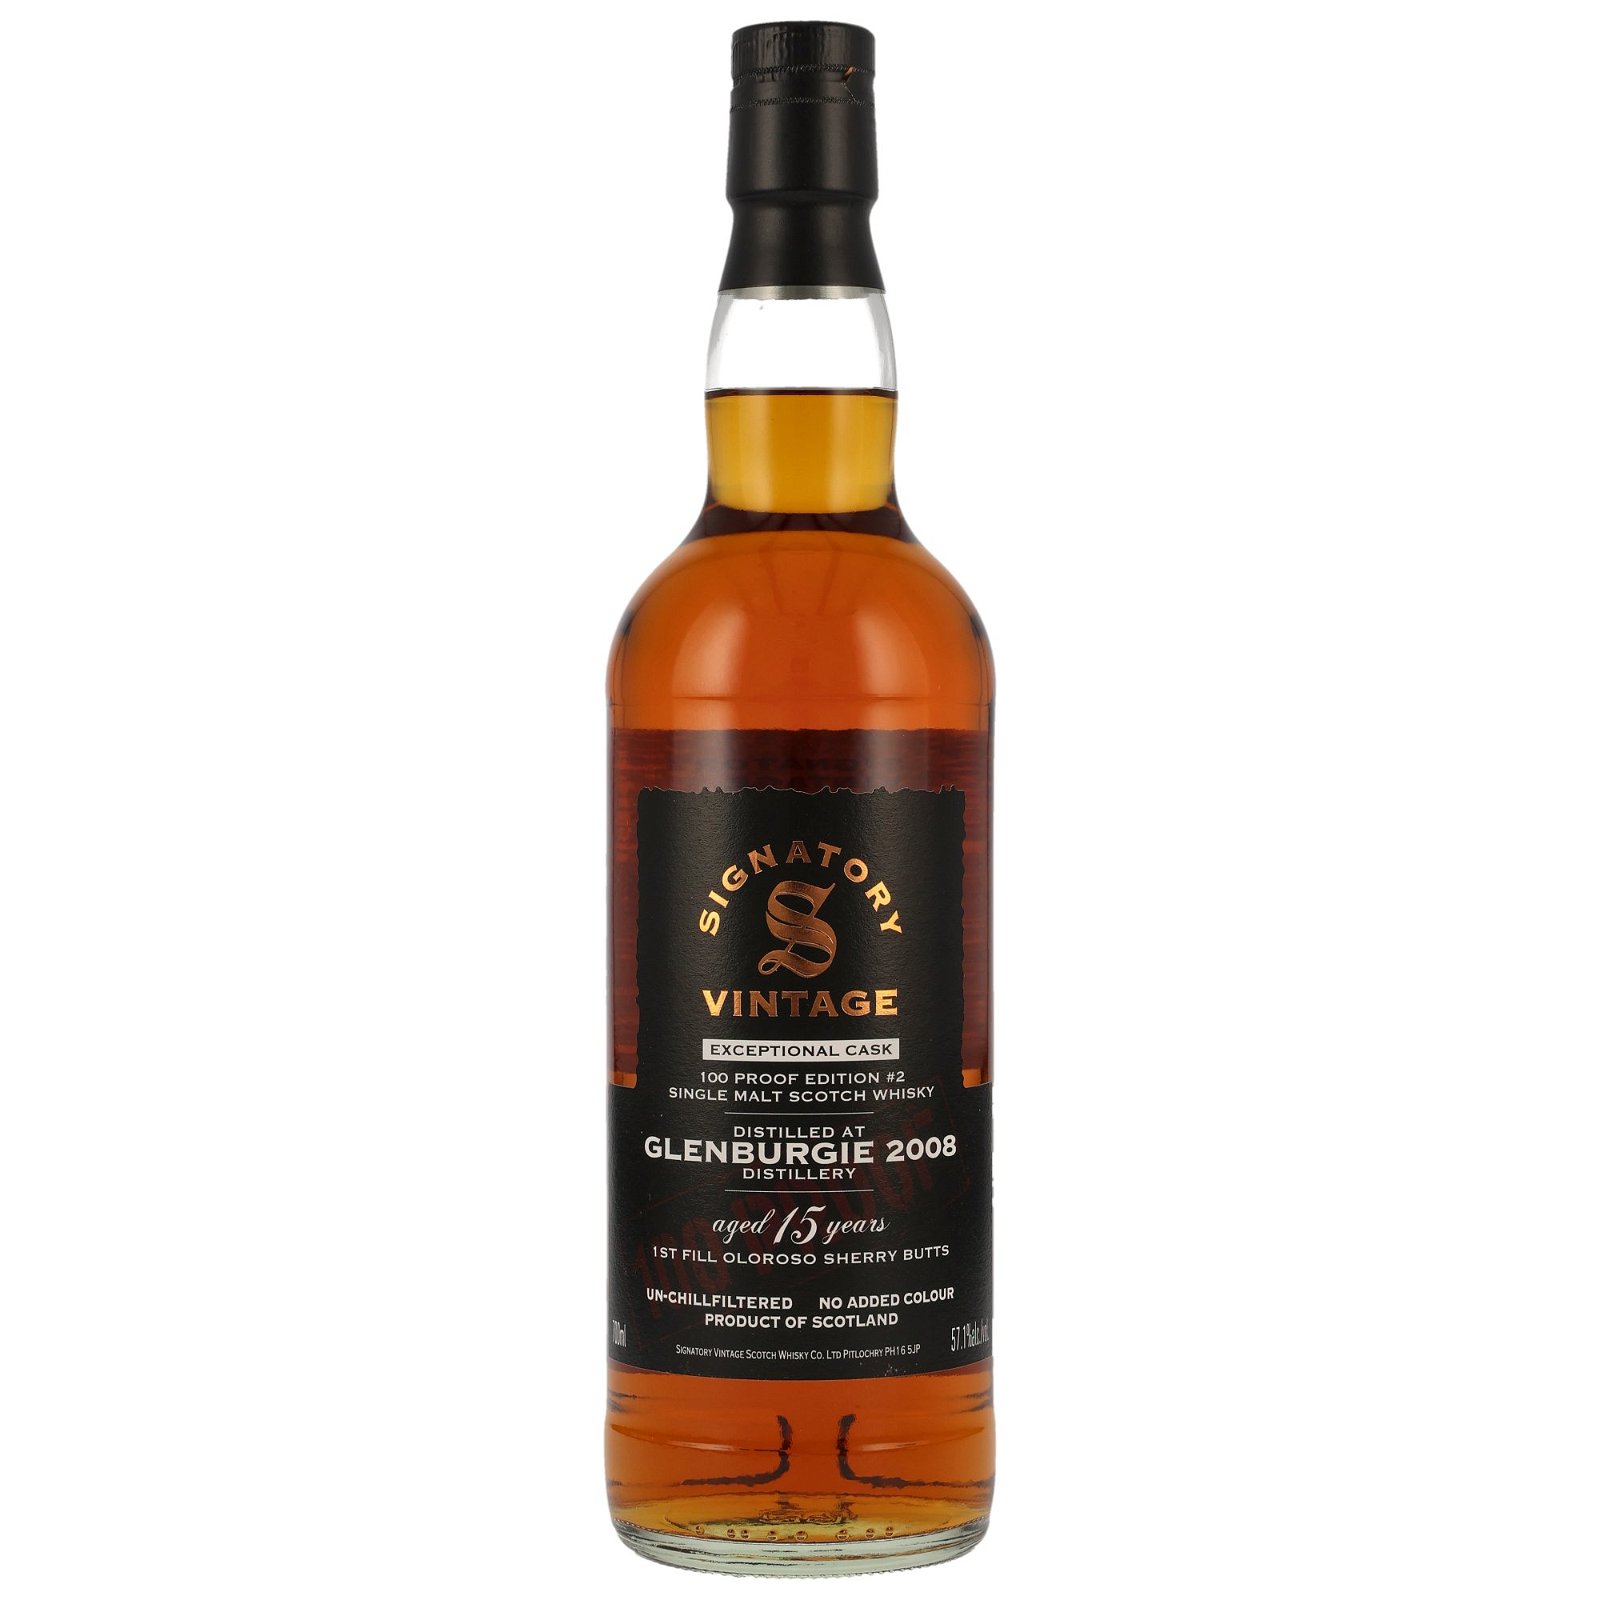 Glenburgie 2008 - 15 Jahre 1st Fill Oloroso Sherry Butts 100 Proof Exceptional Cask Edition #2 (Signatory)